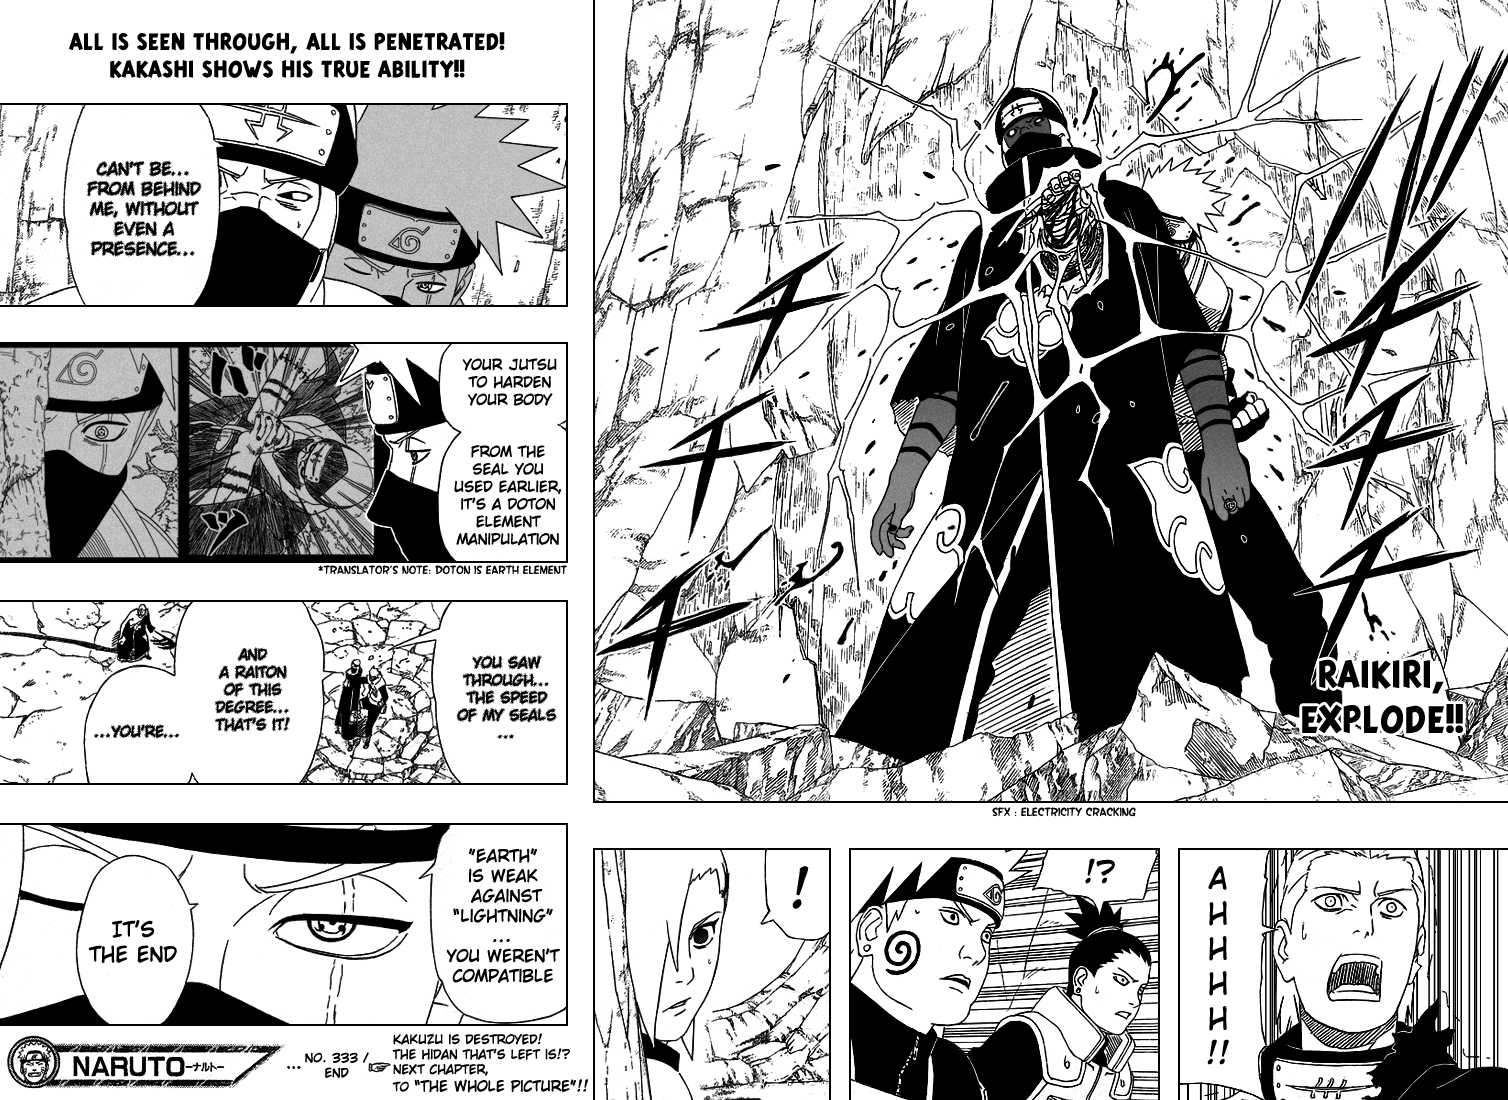 Naruto Shippuden, Vol.37 , Chapter 333 : The Moment Of Victory - Naruto